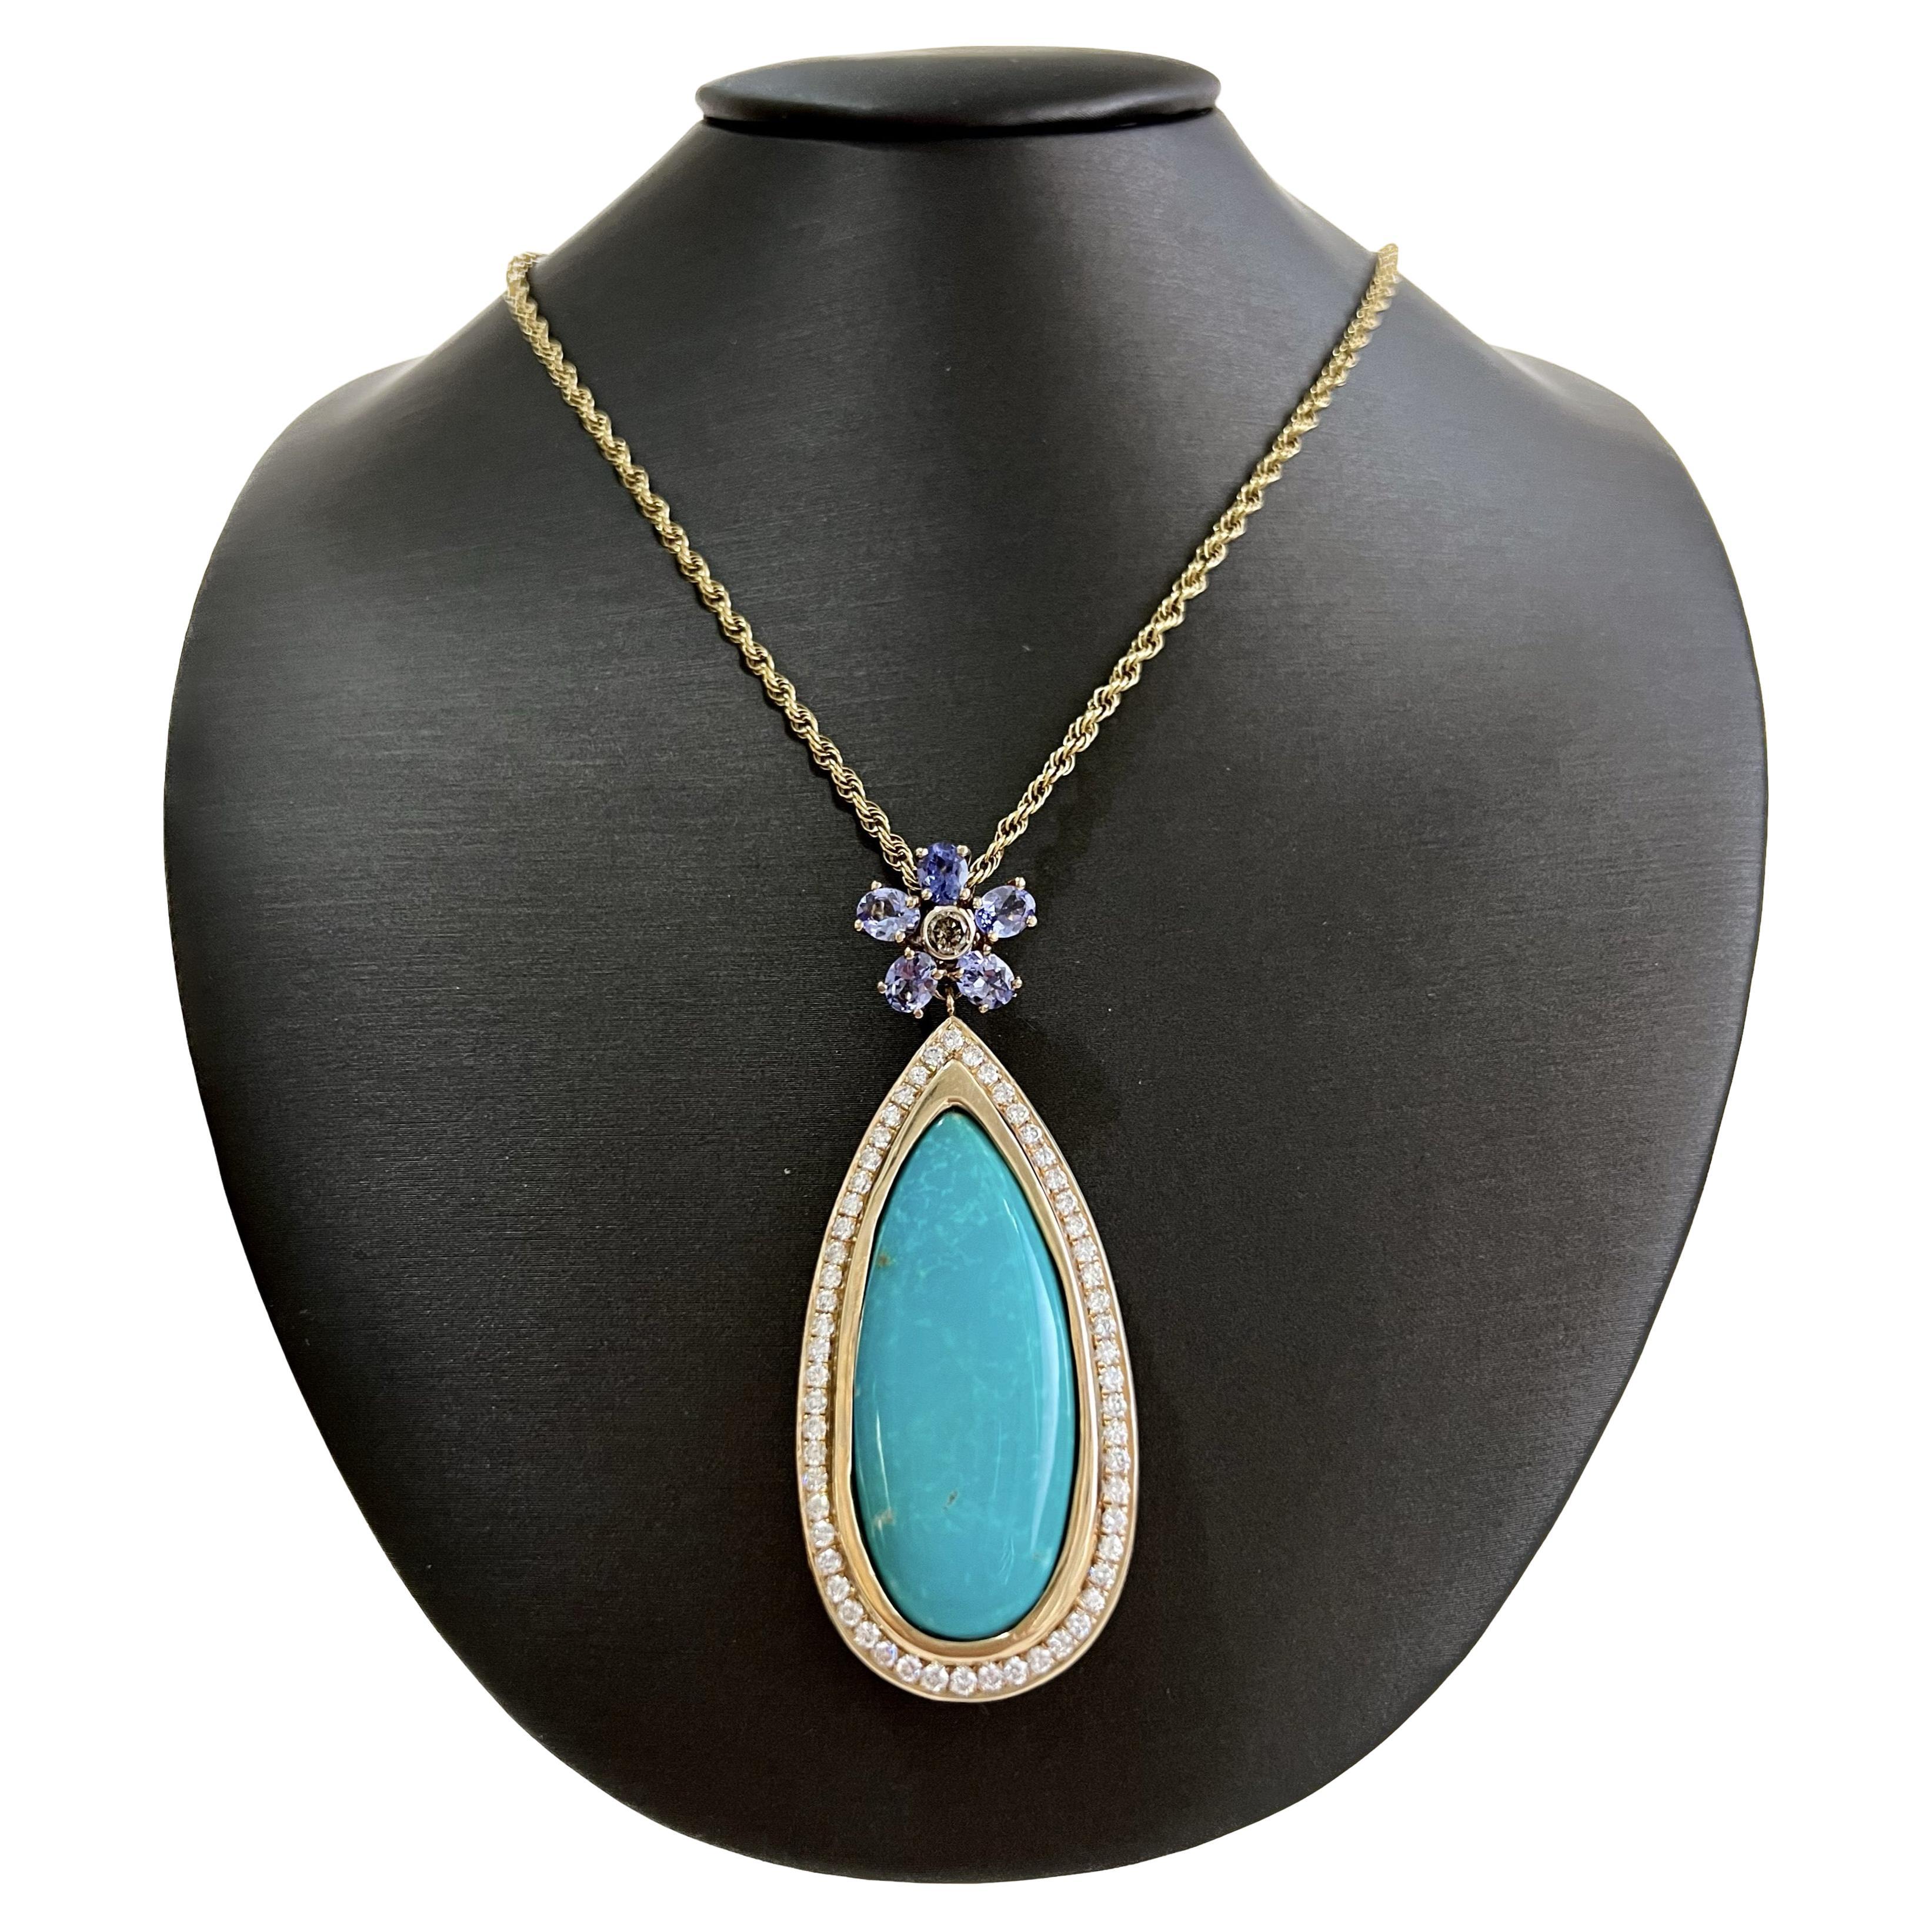 The gorgeous tear drop turquoise is the focal point in this handmade pendant.  The tanzanites form a flower top with a colored diamond bezel set that compliments the sleeping beauty turquoise that is be bezel set in a diamond frame.  The blue